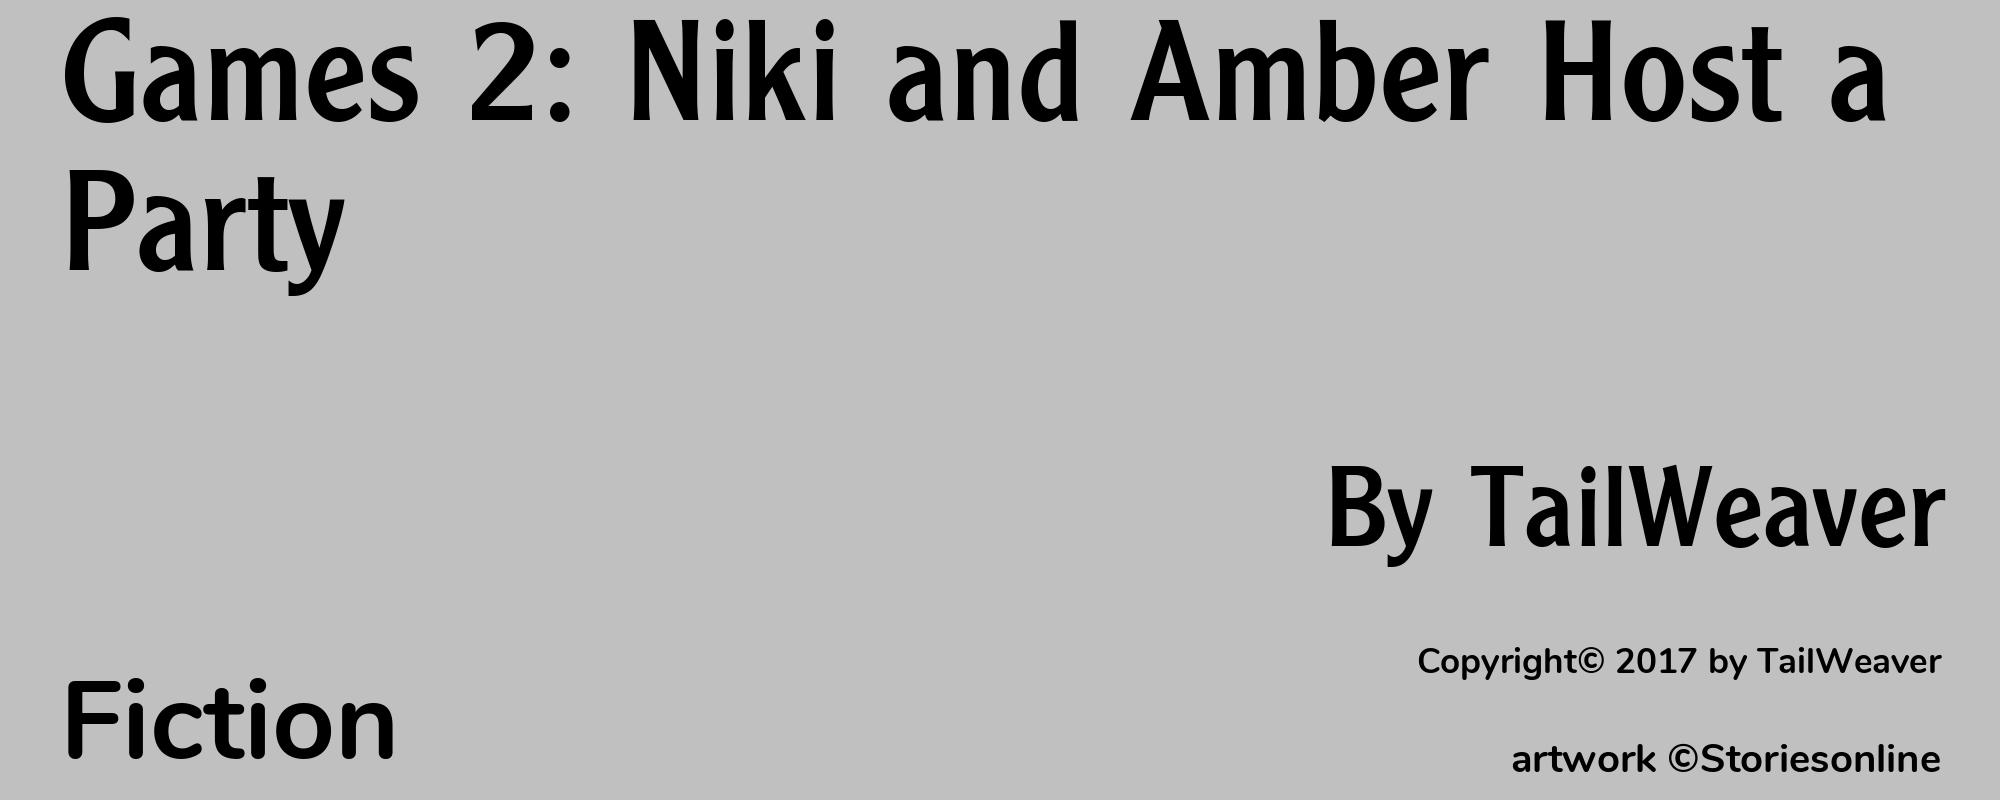 Games 2: Niki and Amber Host a Party - Cover